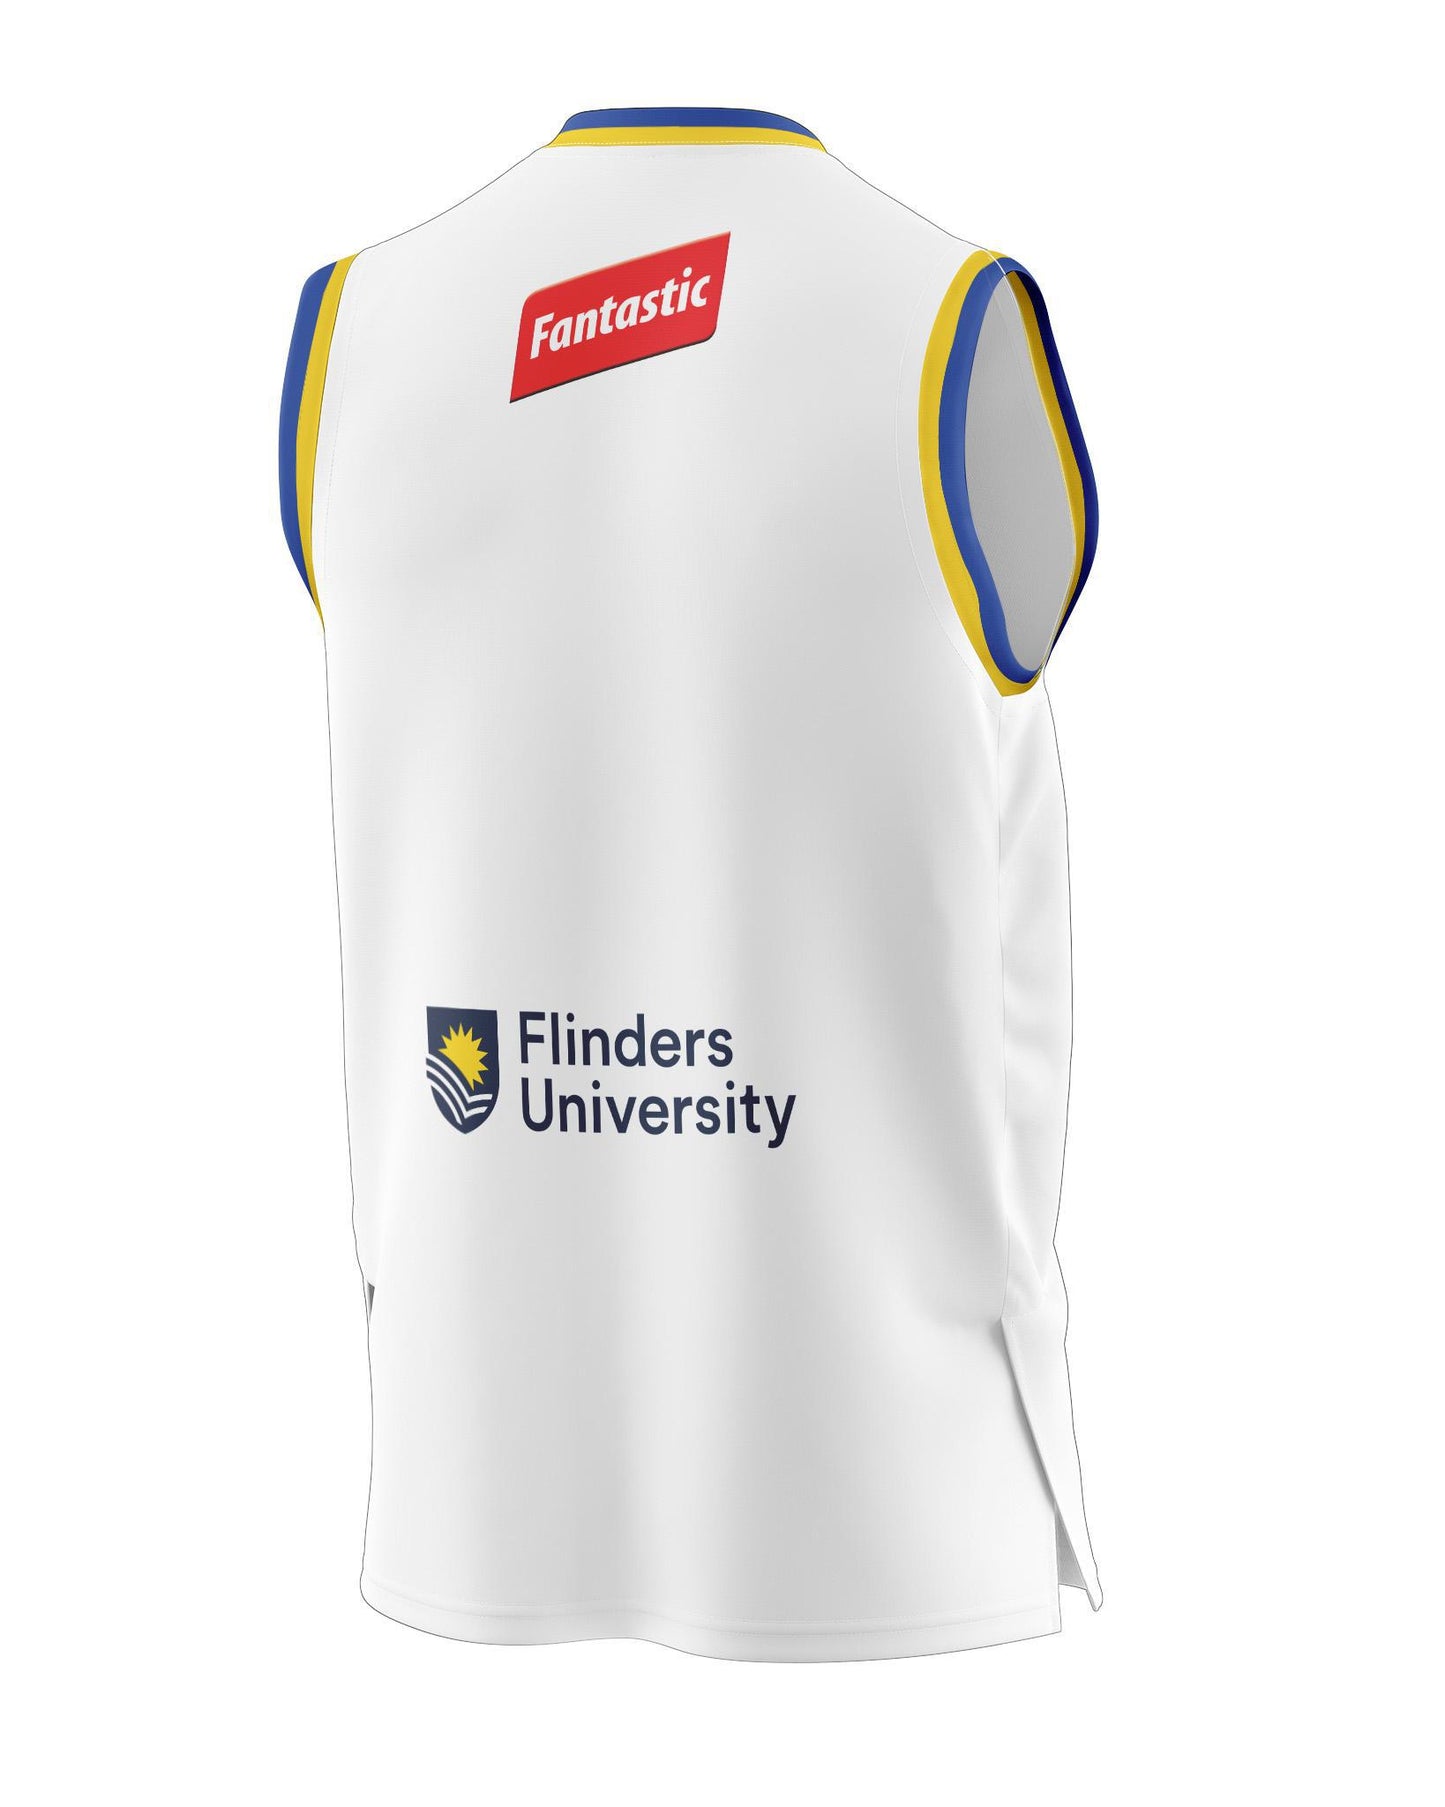 22/23 Youth Adelaide 36ers Heritage Jerseys